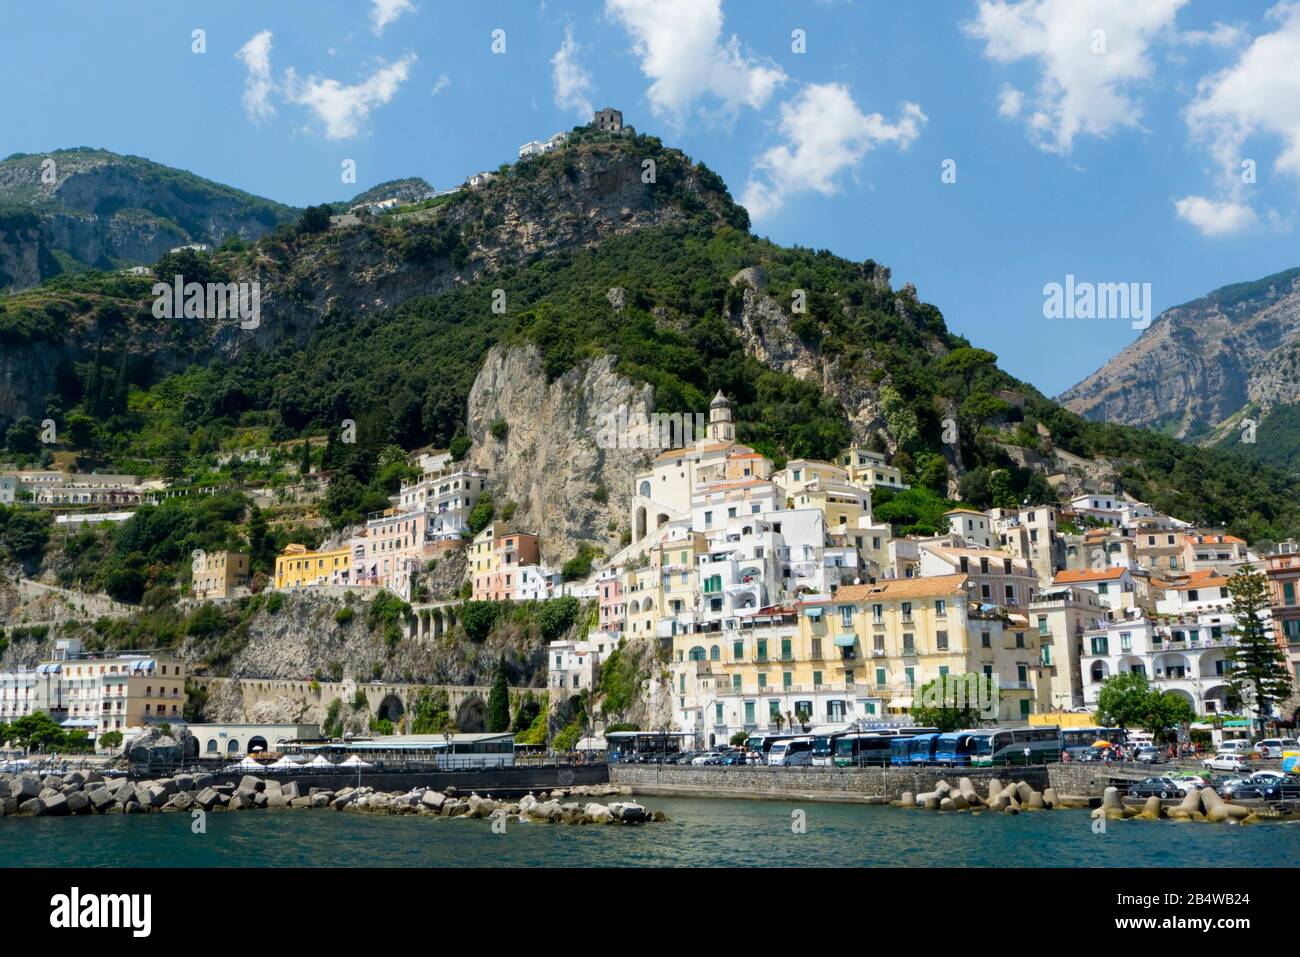 Scenic View Of Amalfi Town & Mountains  Of The Amalfi Coast In Italy Stock Photo